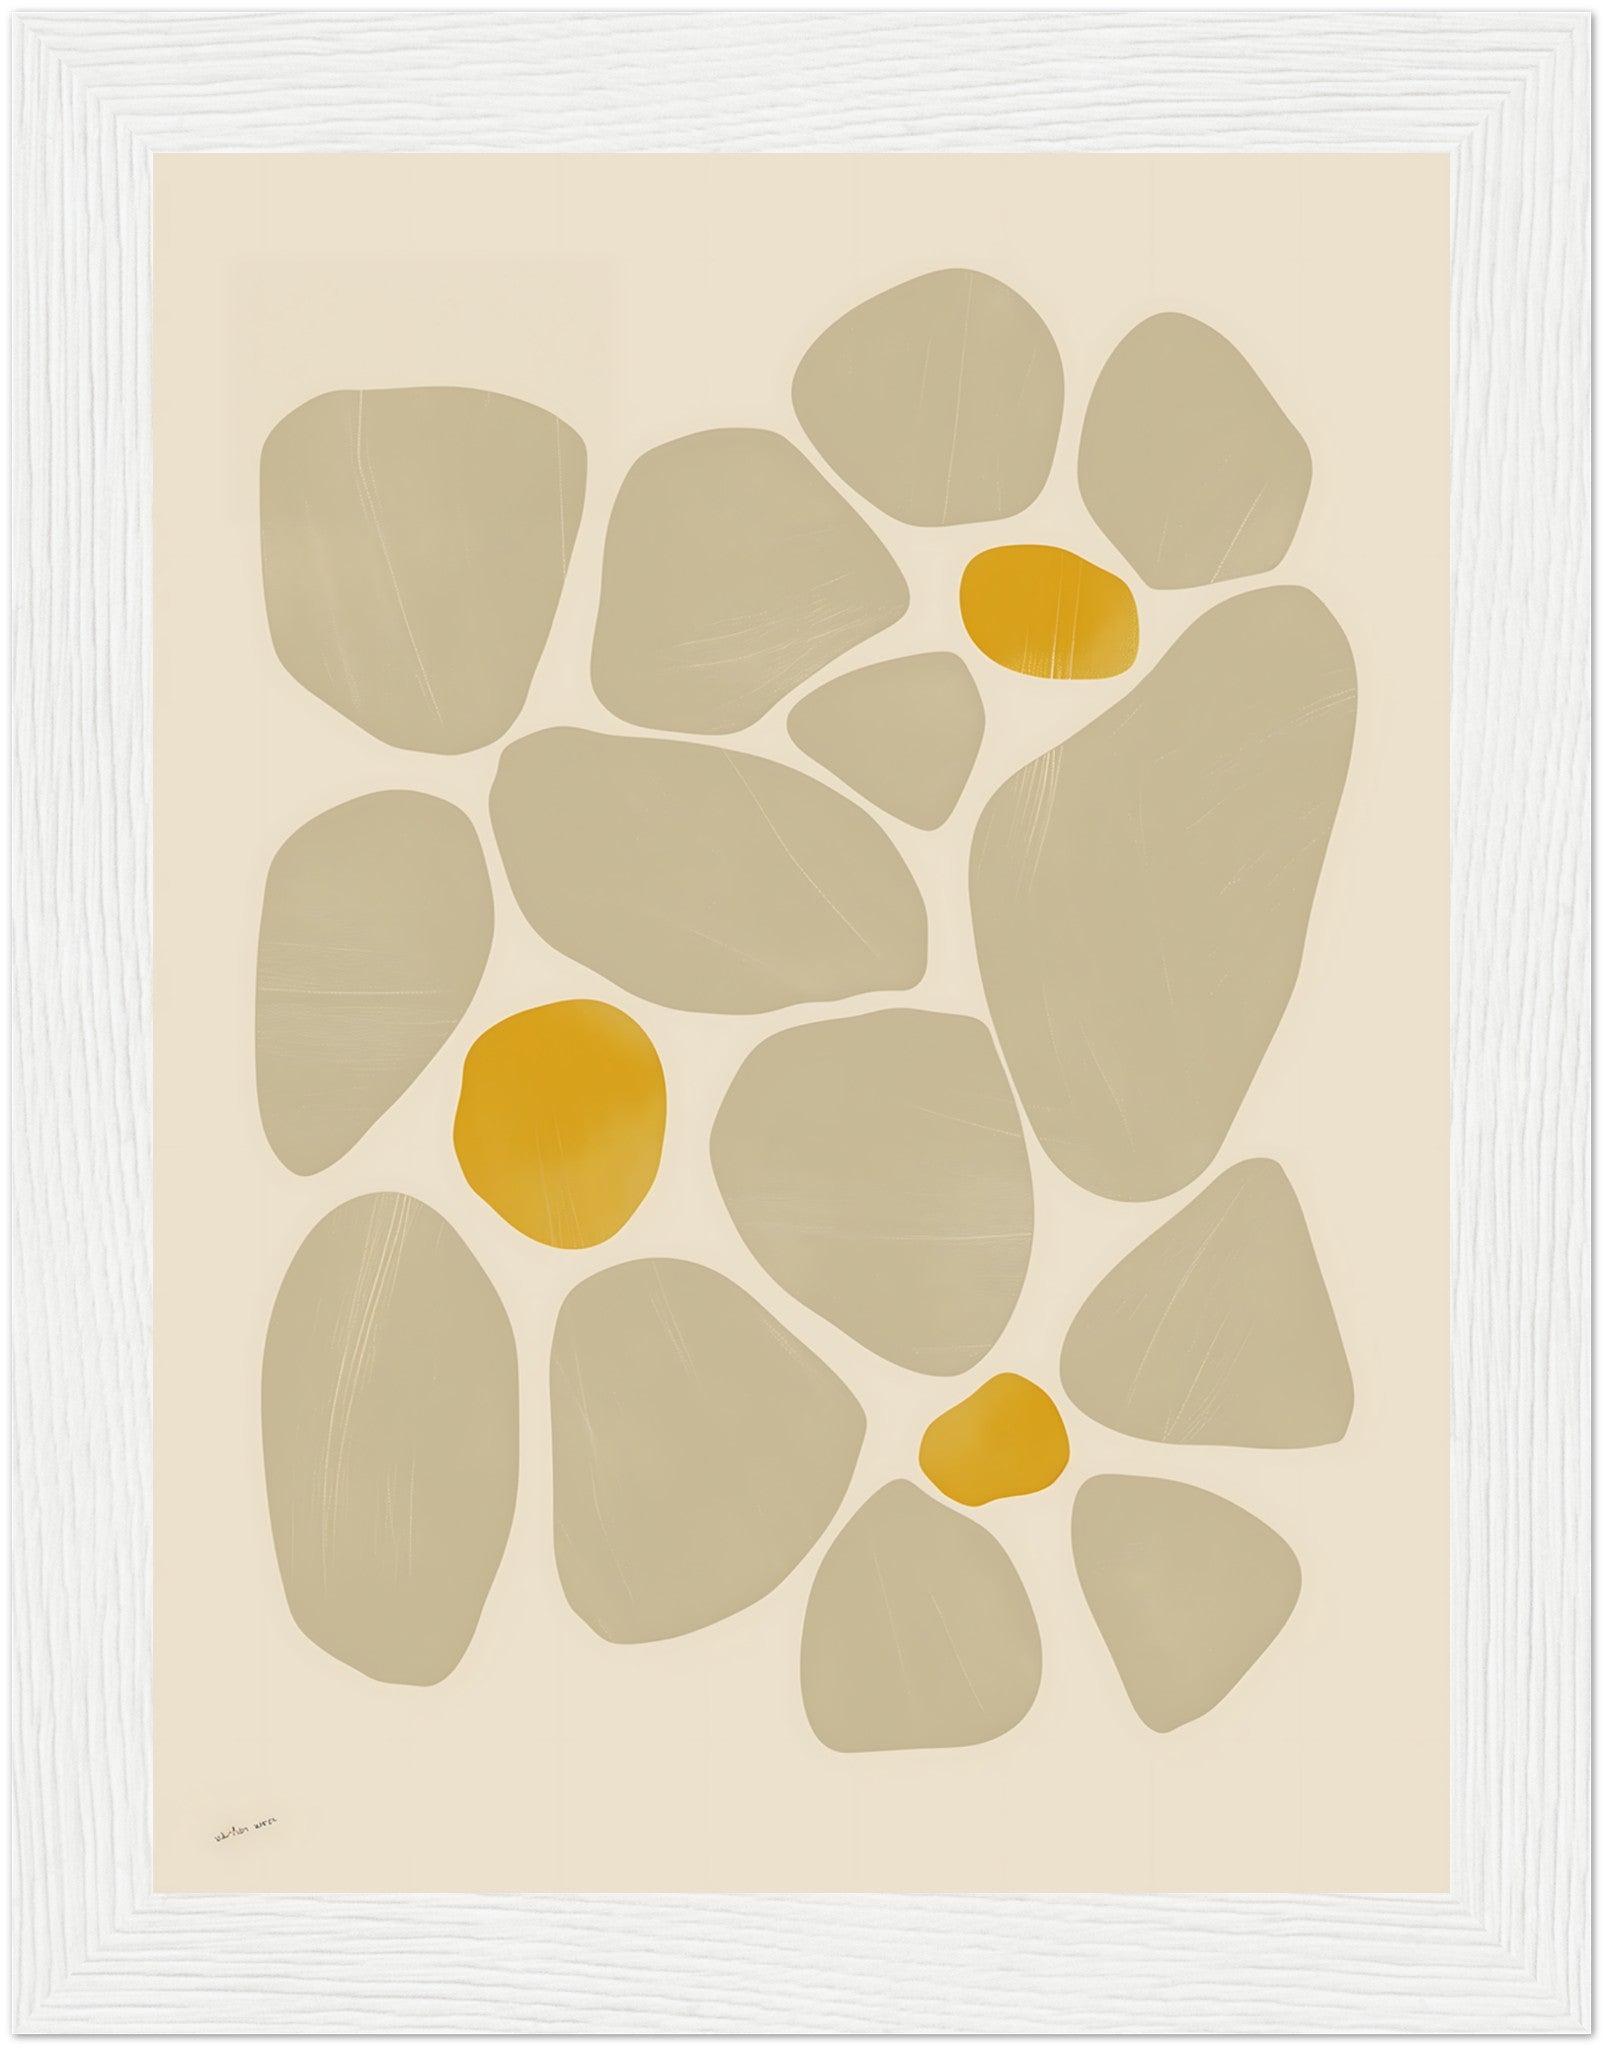 Abstract artwork featuring gray and yellow pebble shapes on a cream background, framed in brown.